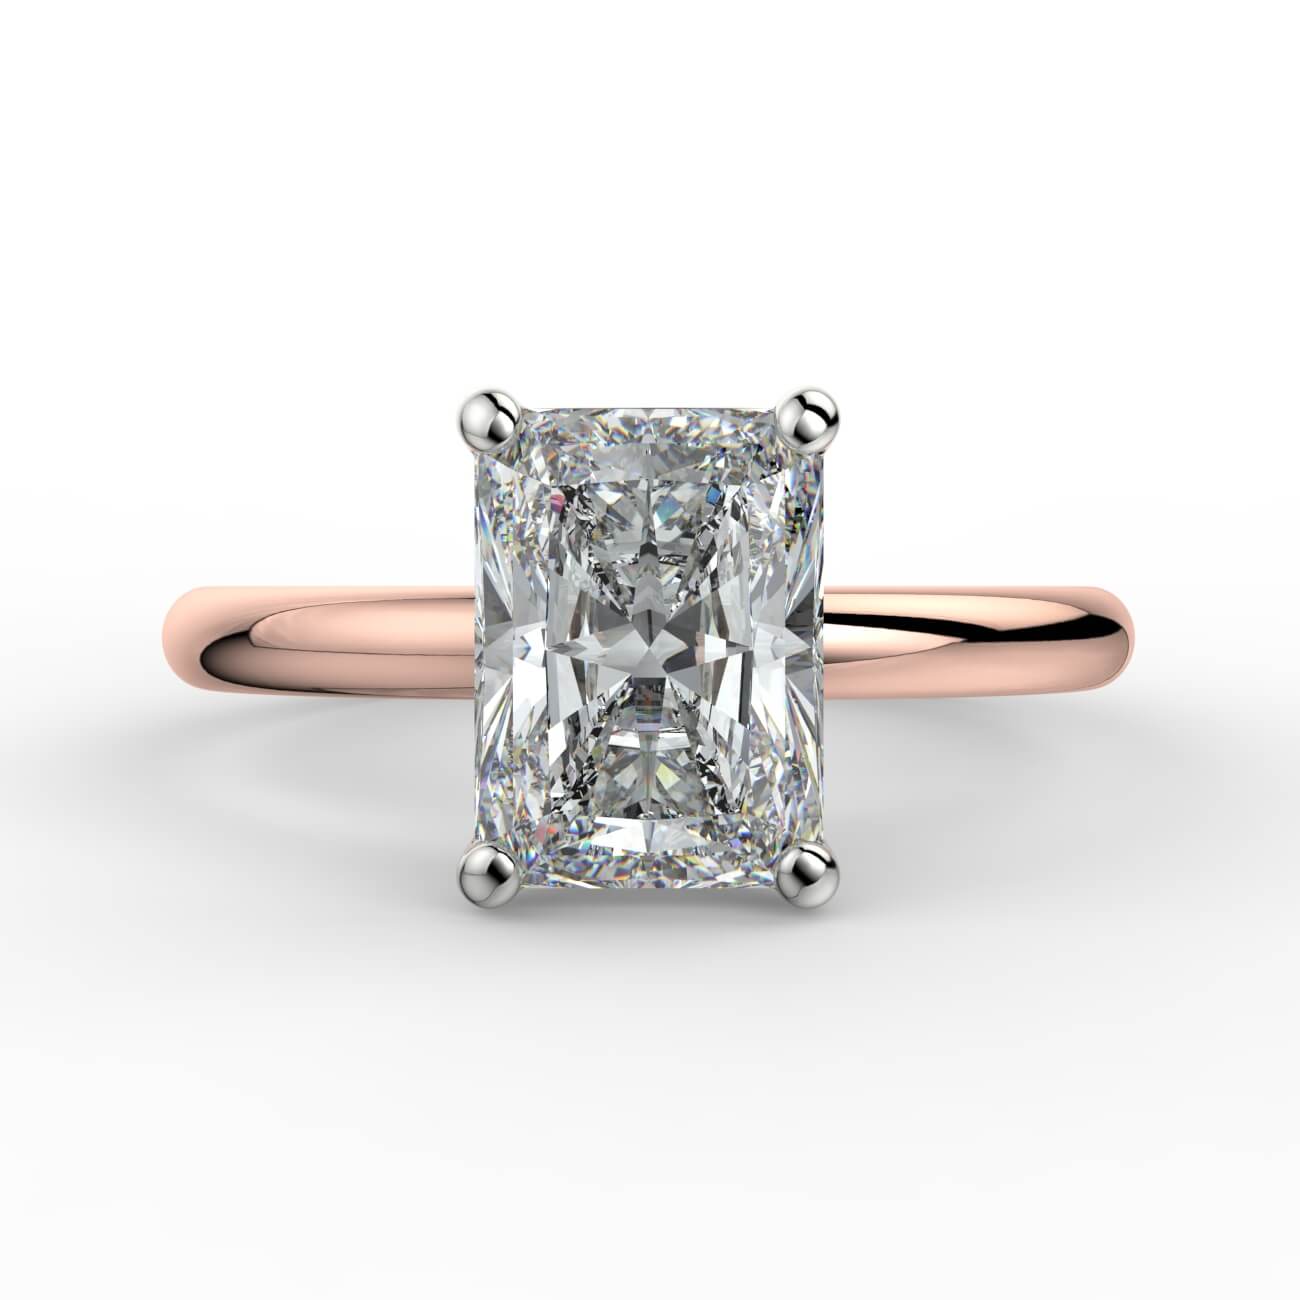 Solitaire radiant cut diamond engagement ring in rose and white gold – Australian Diamond Network